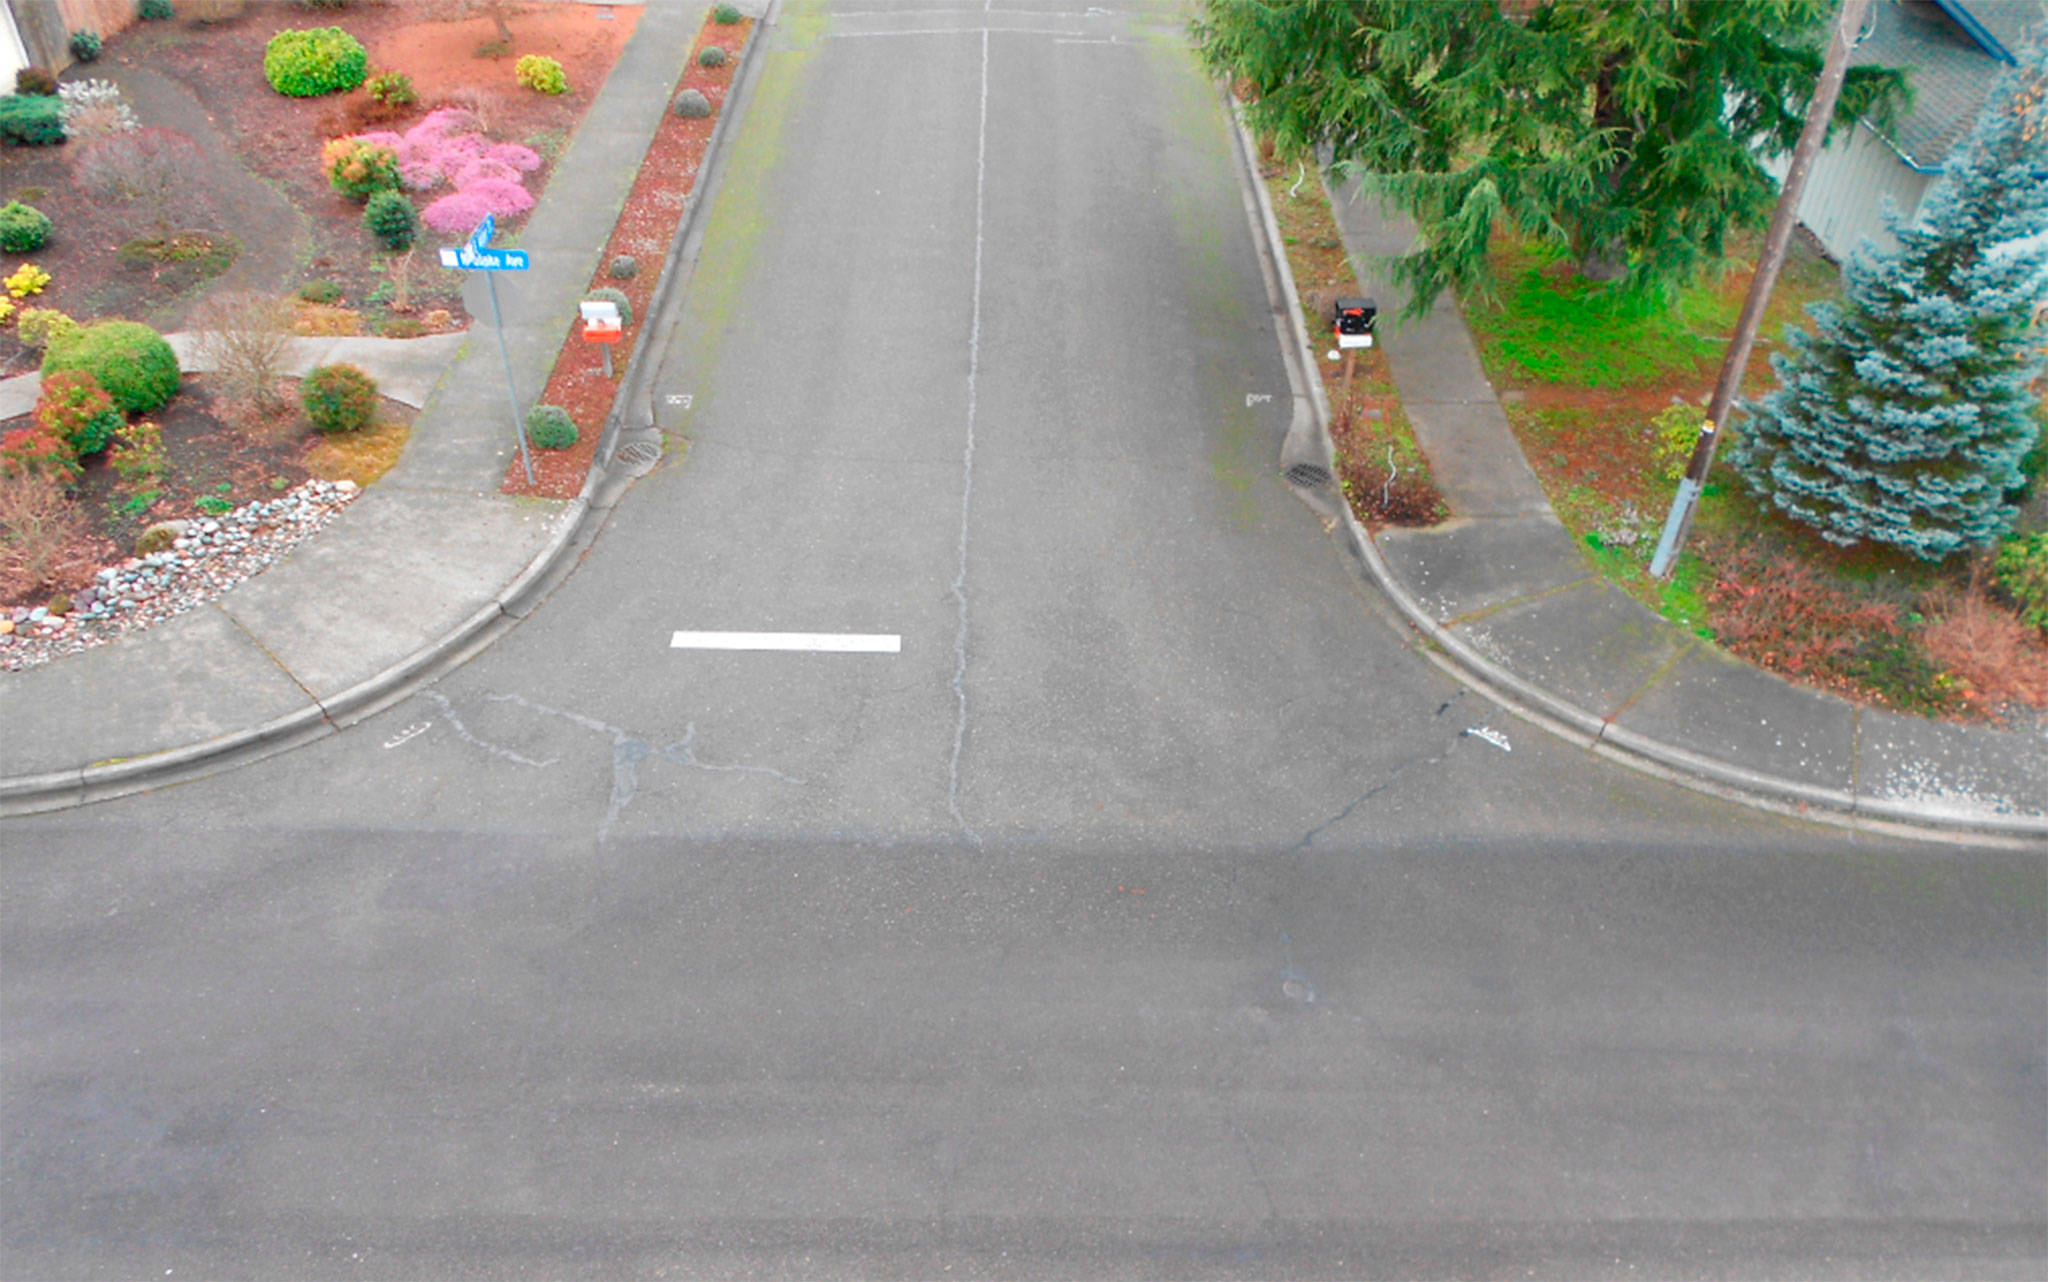 Crews with InterWest Construction, Inc. began installing new sidewalks and curbs along North Blake Avenue on Monday, March 26. City of Sequim staff estimate work being done before mid-July. Photo courtesy the City of Sequim